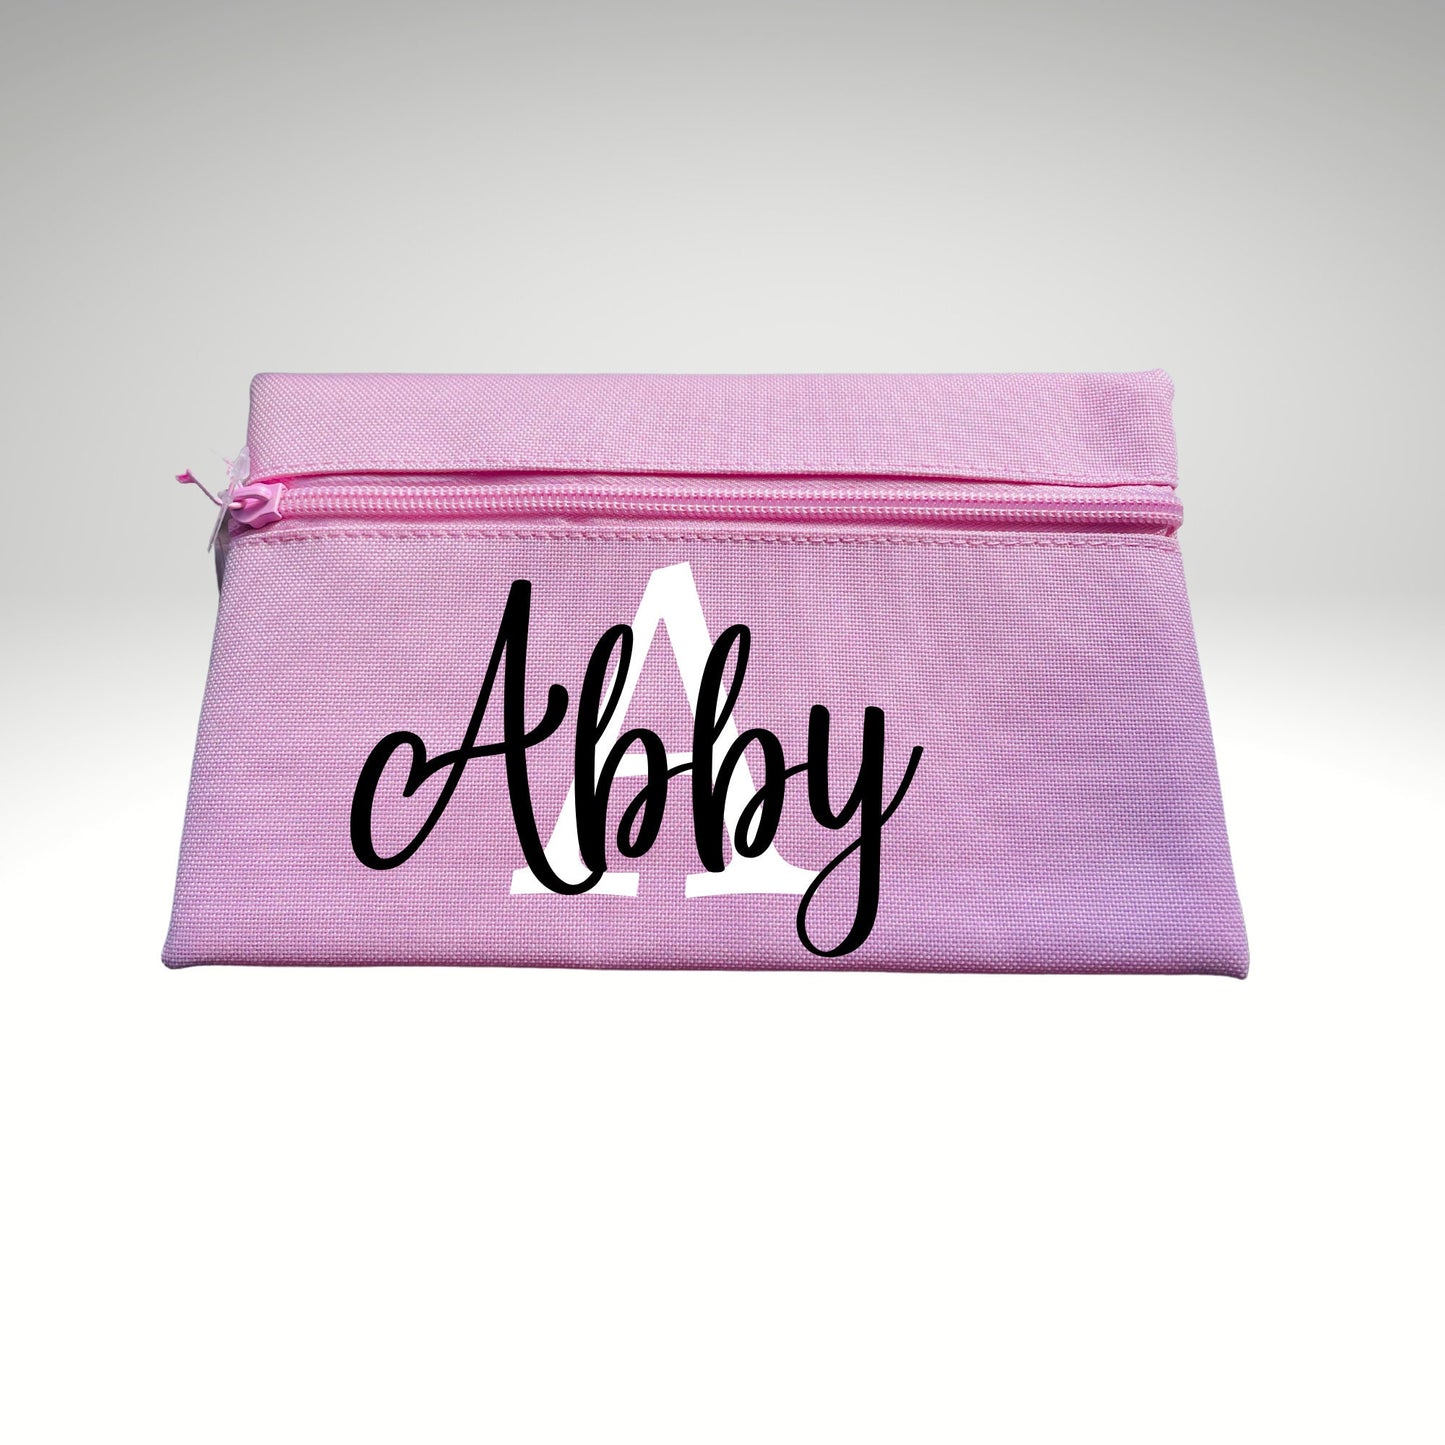 Stocking Filler Personalised Pencil Case